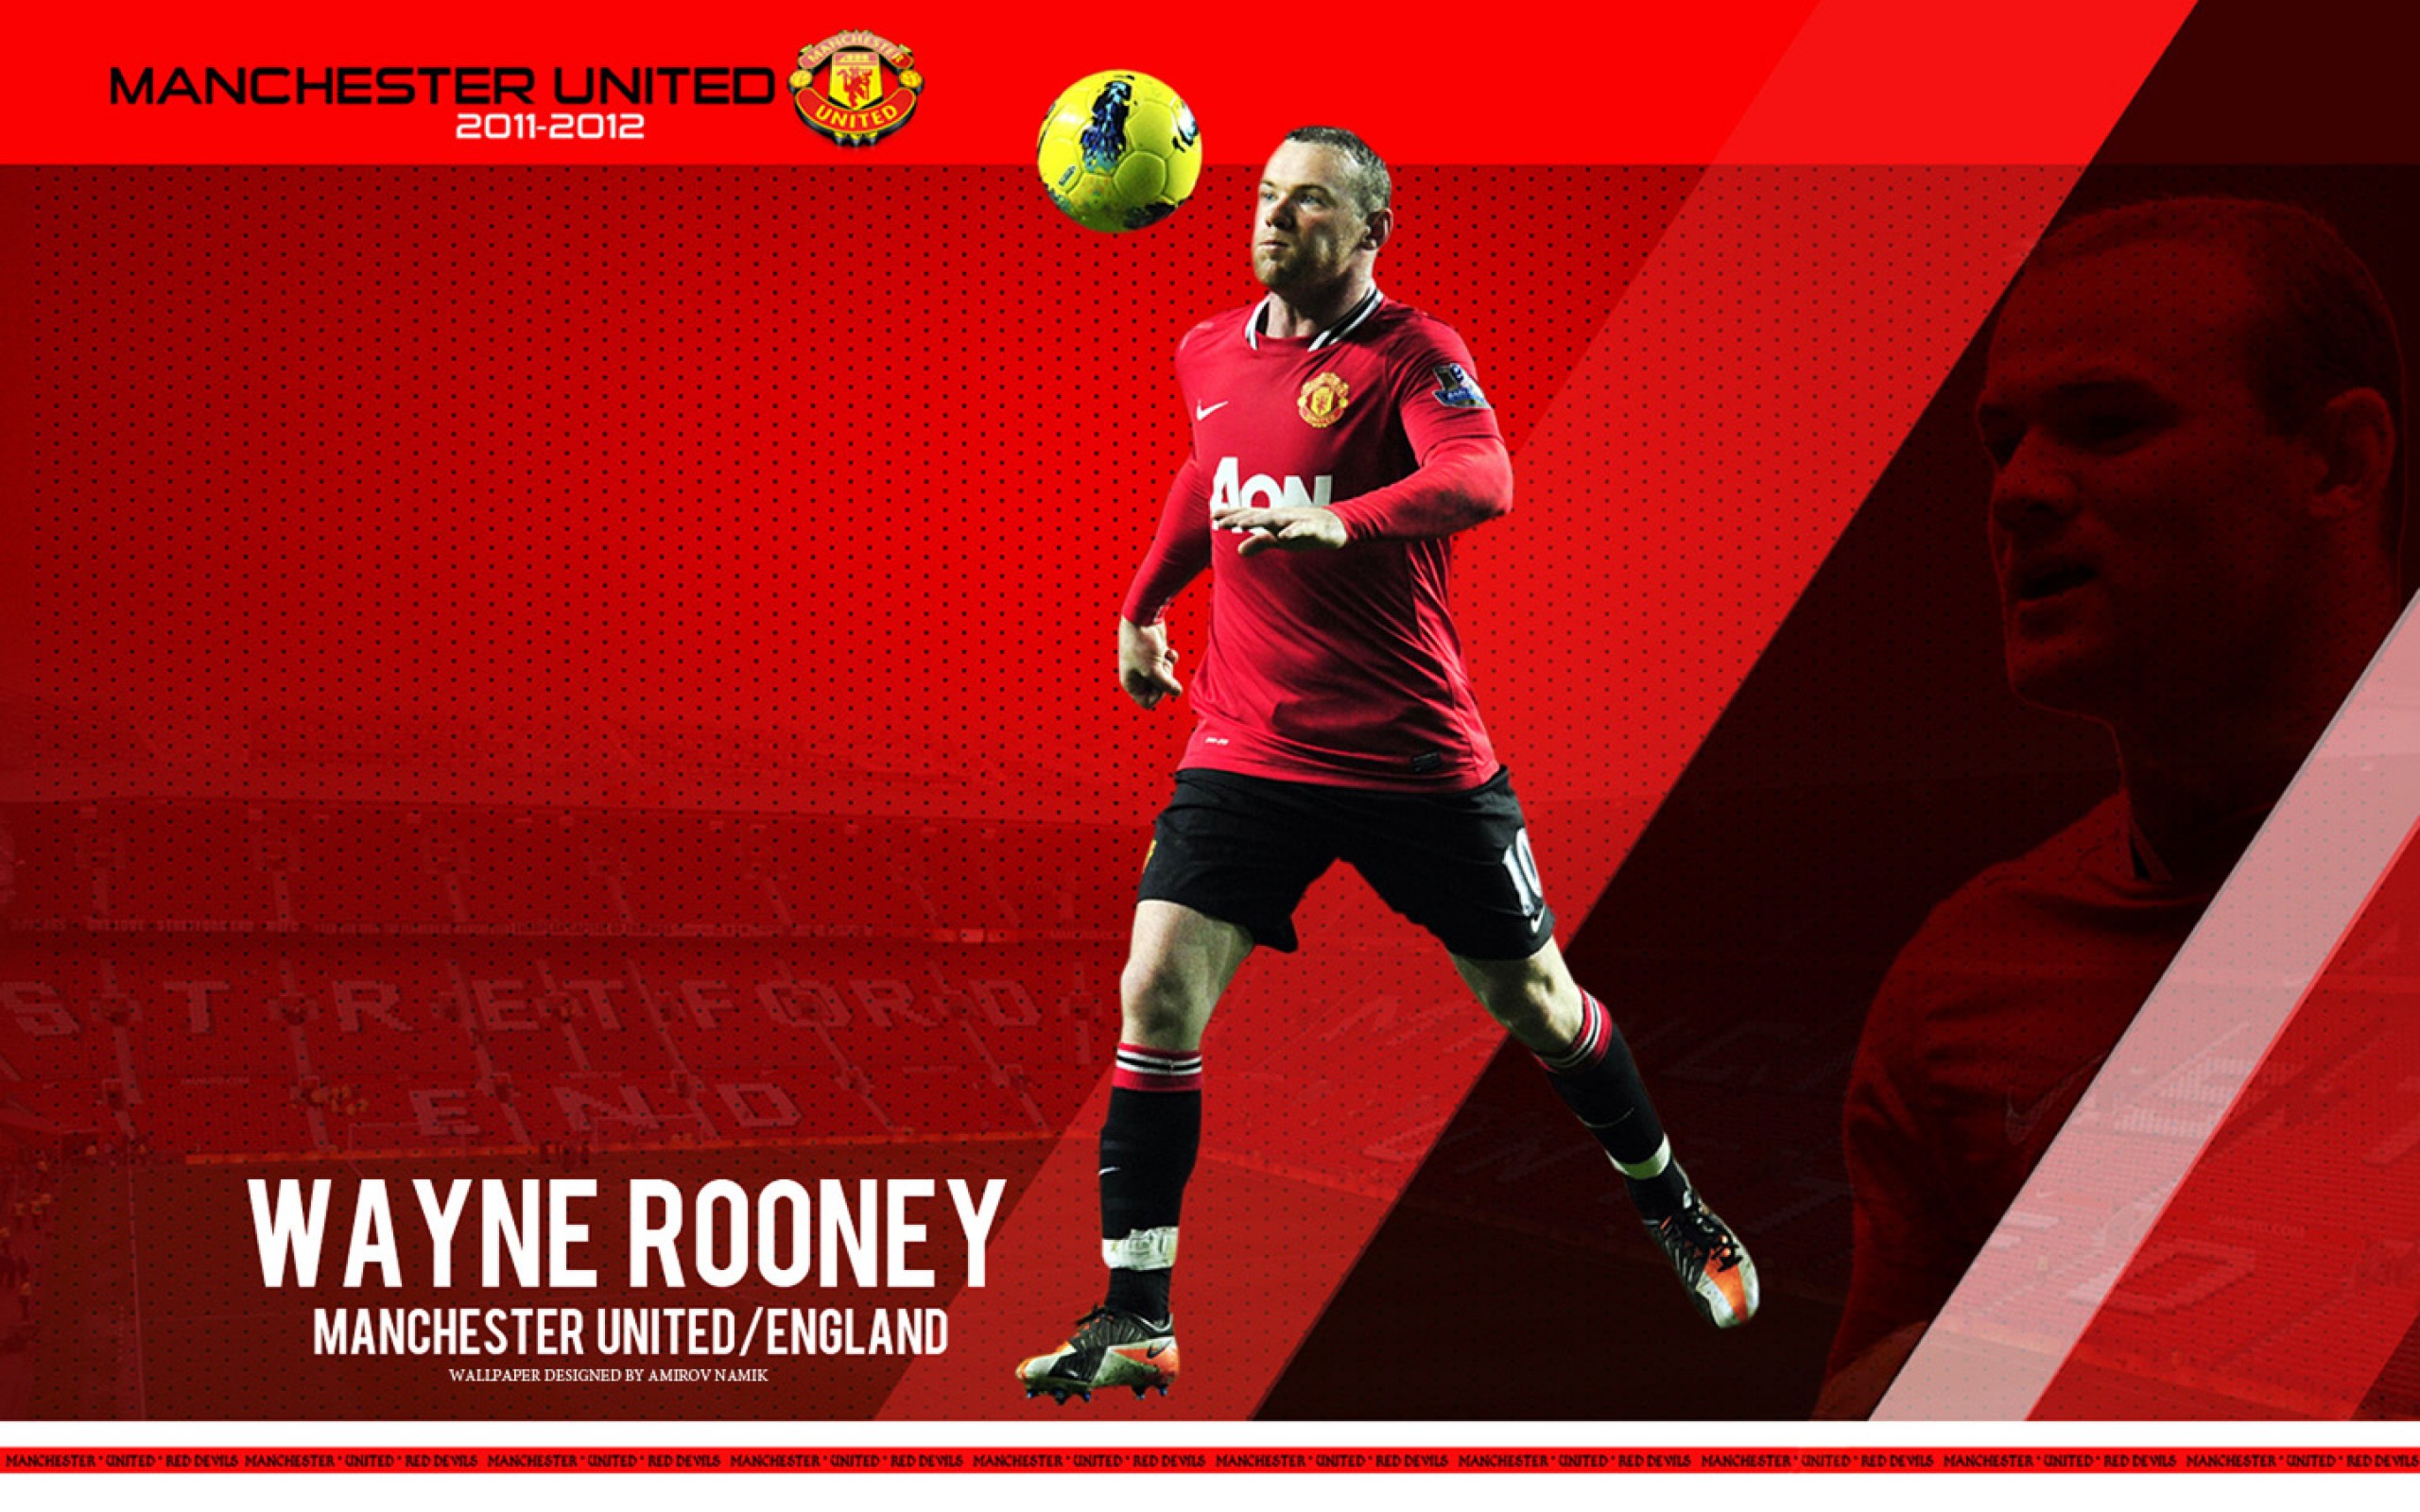 Wayne Rooney - Wayne Rooney Wallpaper 2012 , HD Wallpaper & Backgrounds